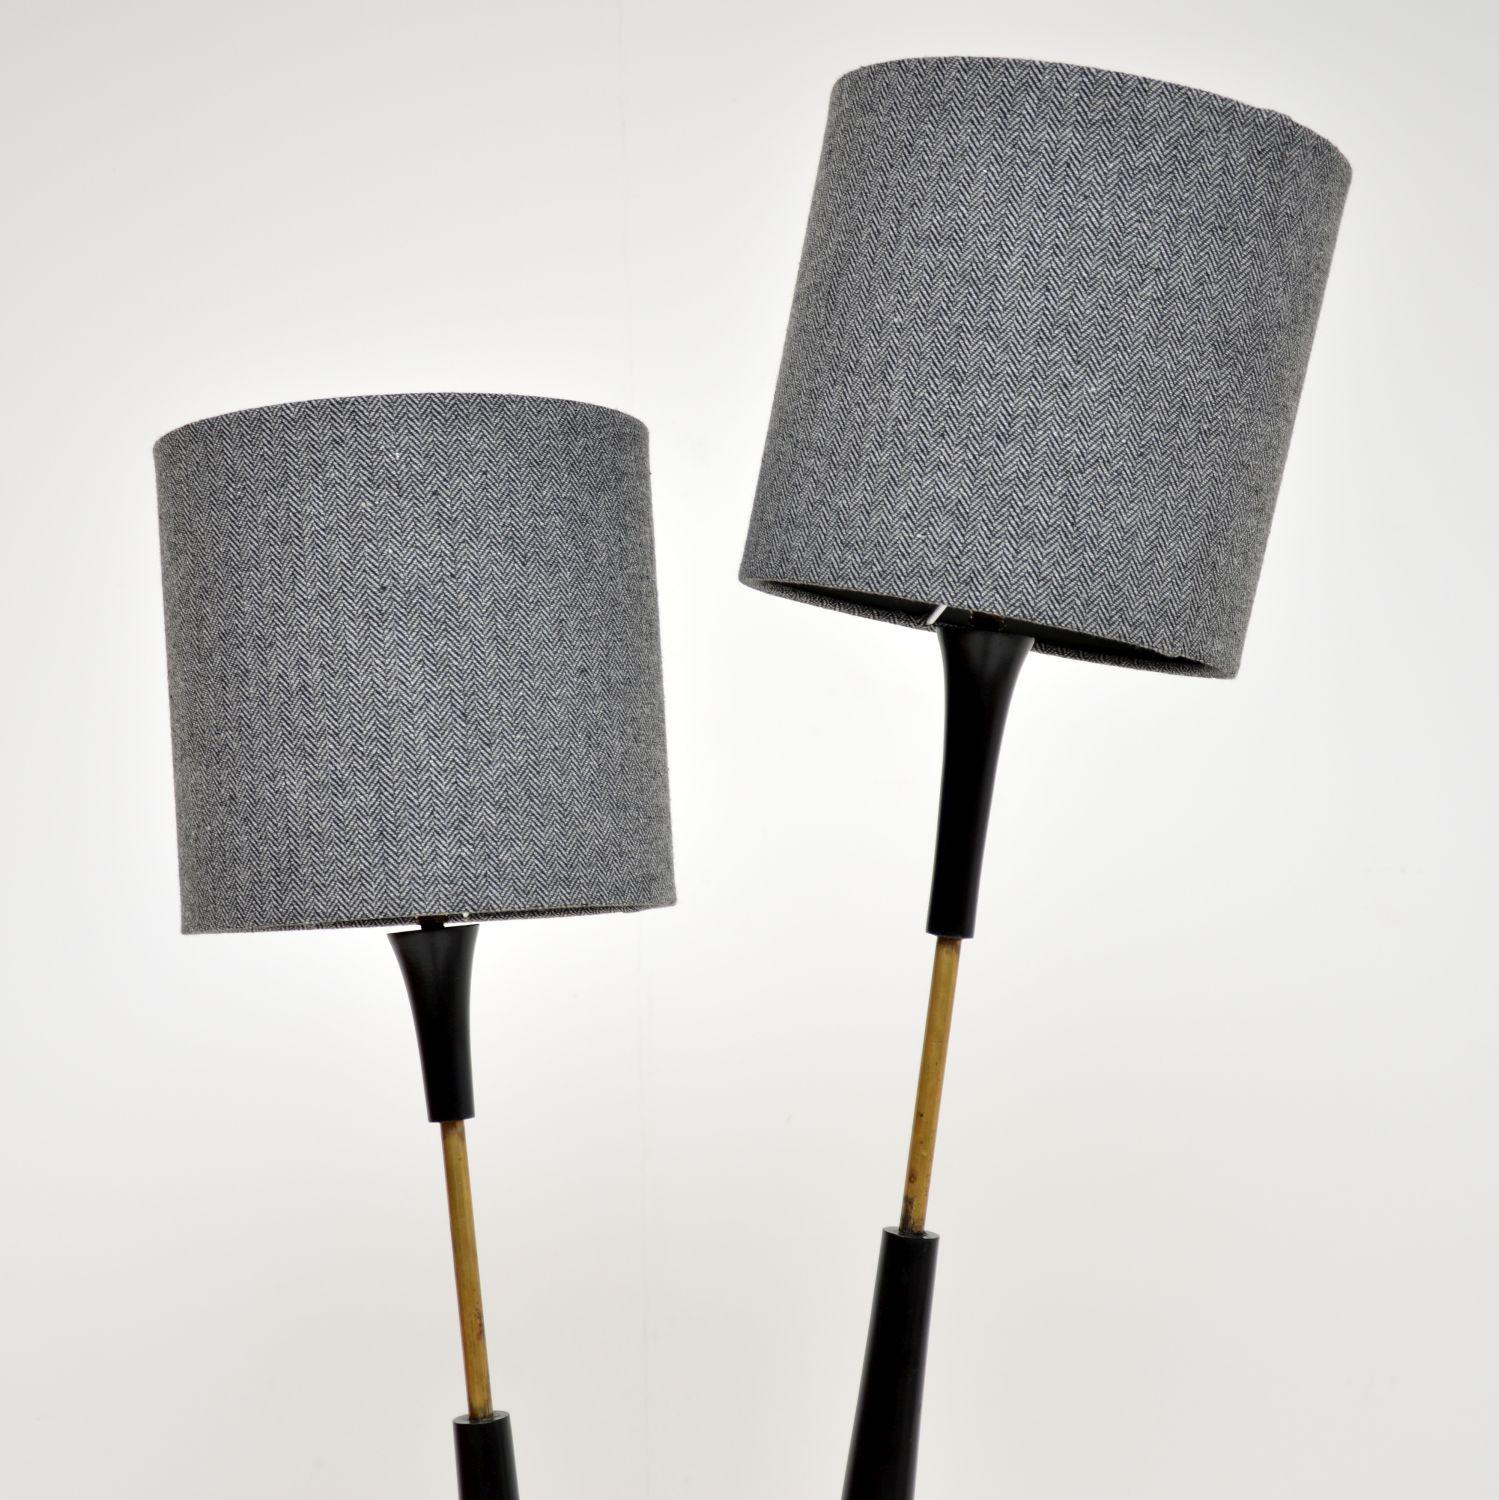 floor lamp with two heads